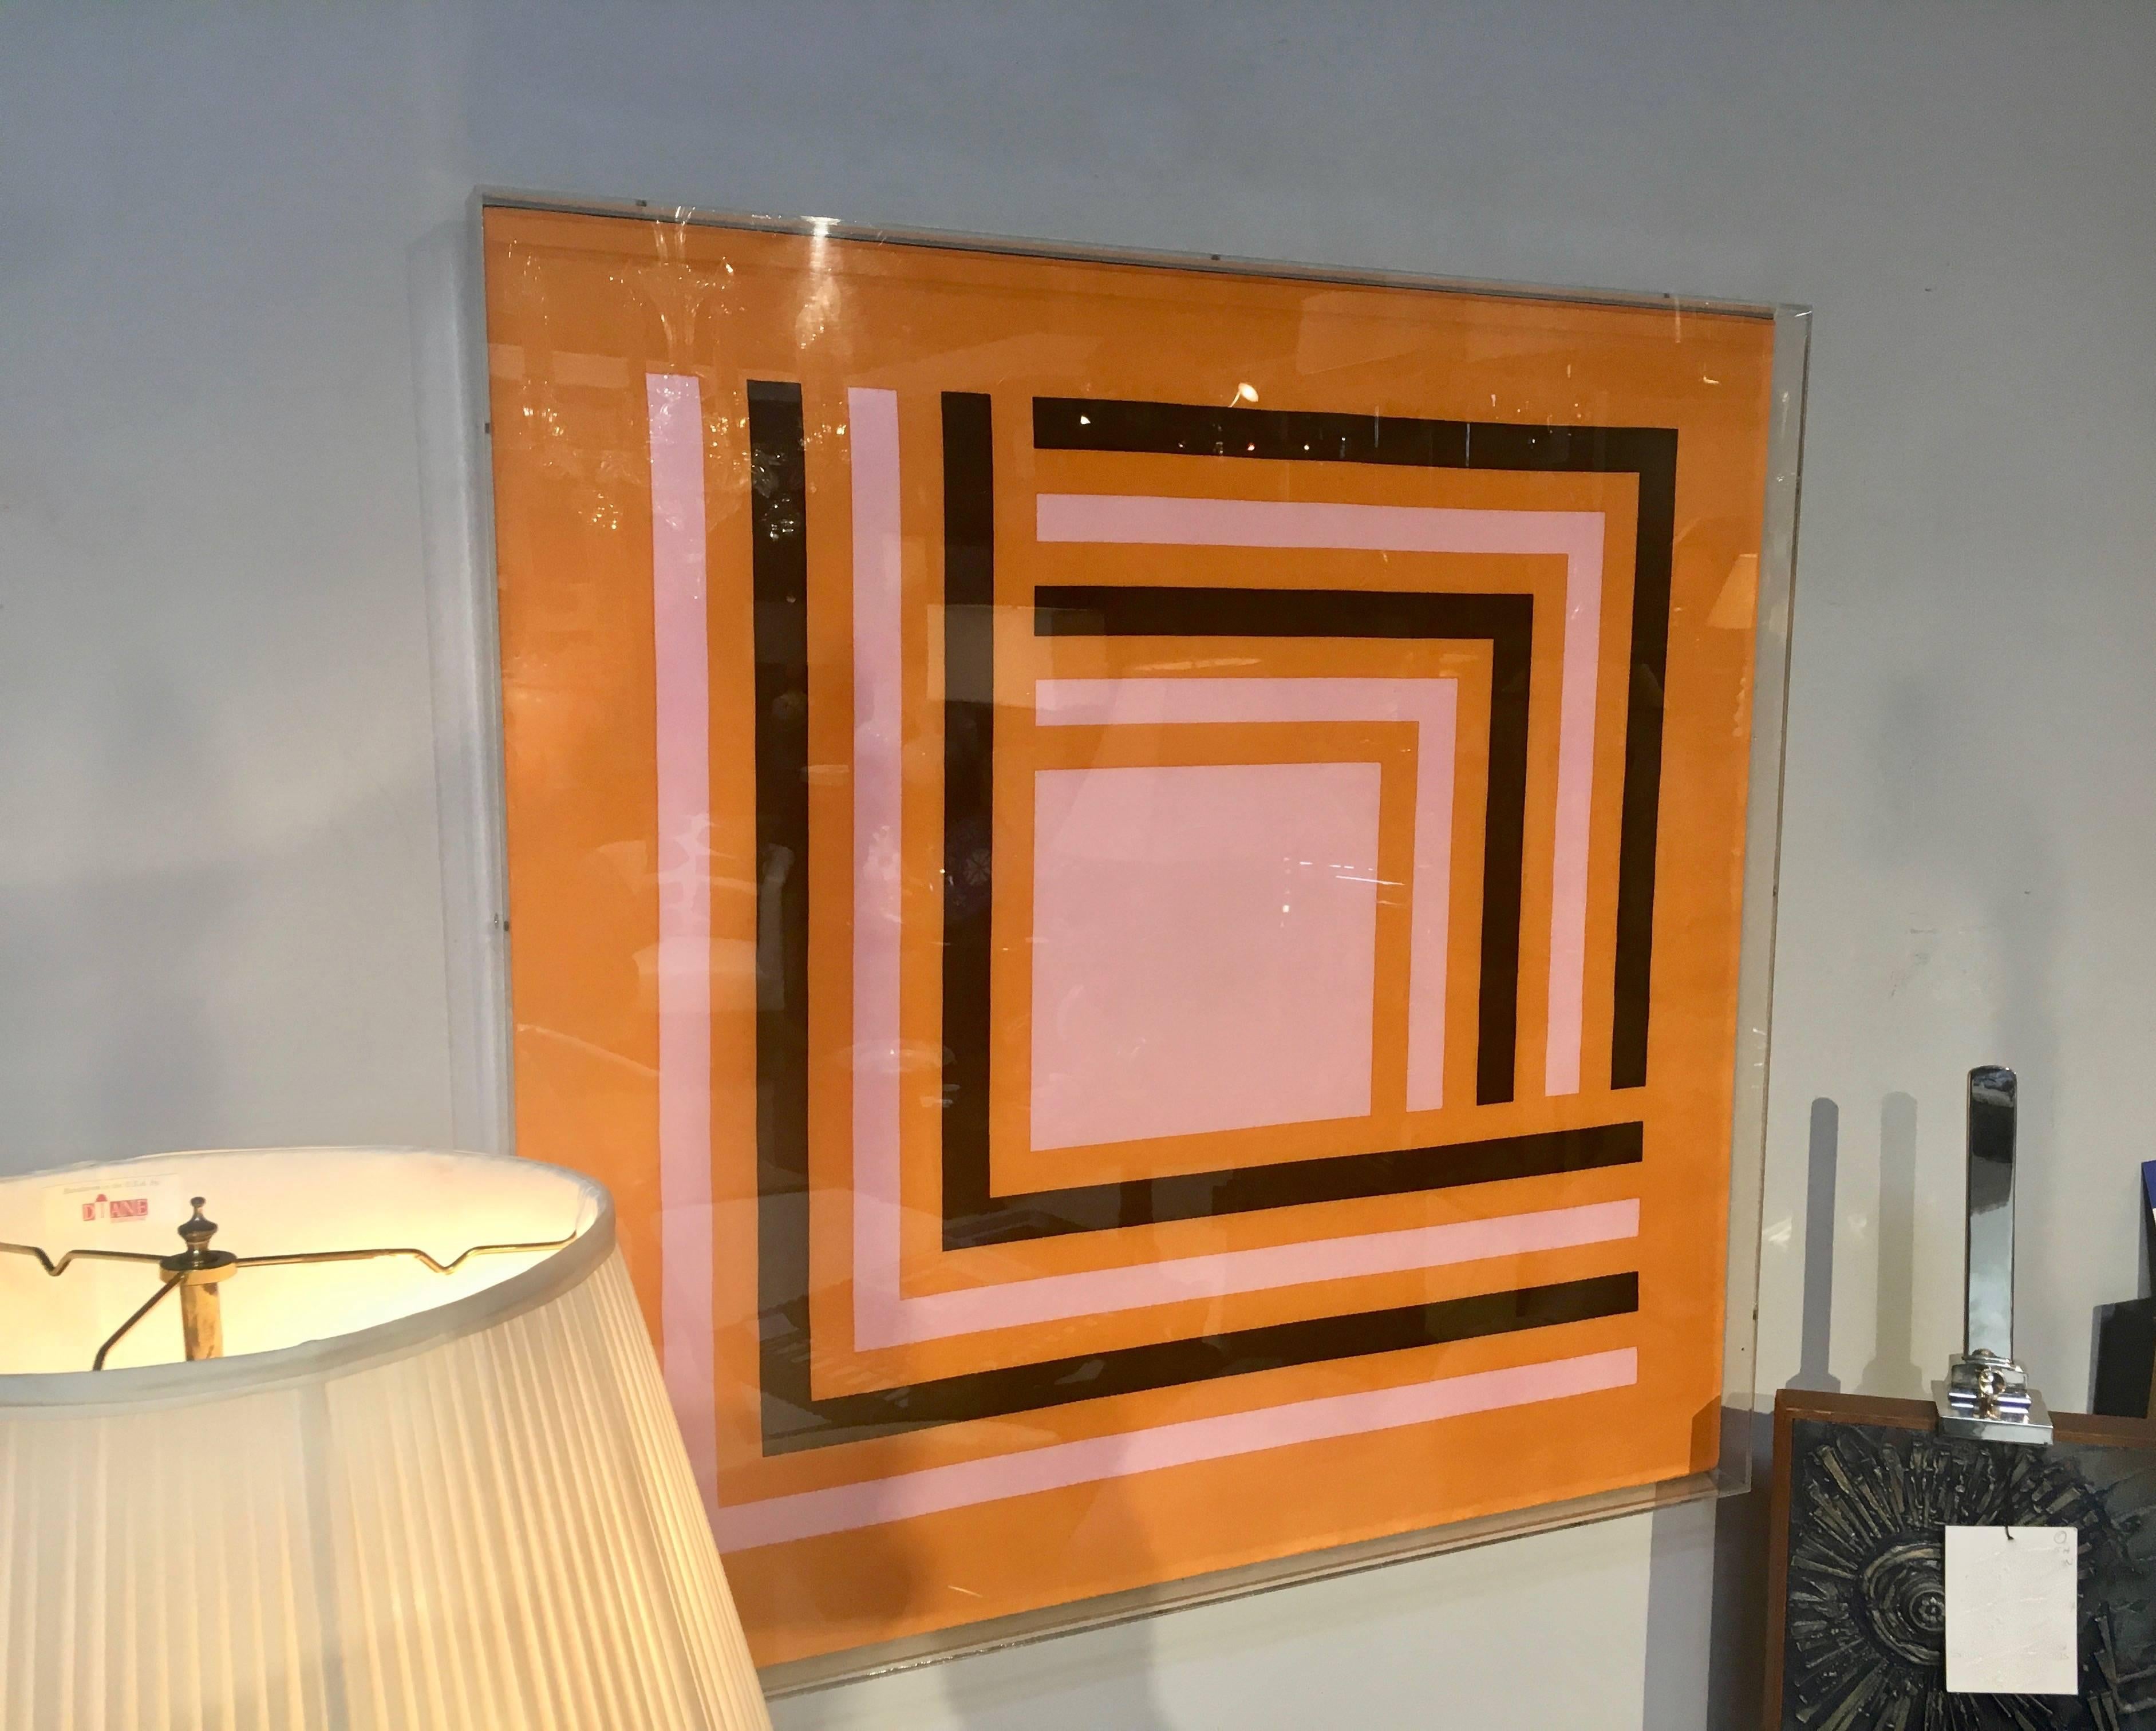 Unknown Modernist Abstract Vintage Silk Scarf, Manner of Josef Albers, Lucite Box Frame